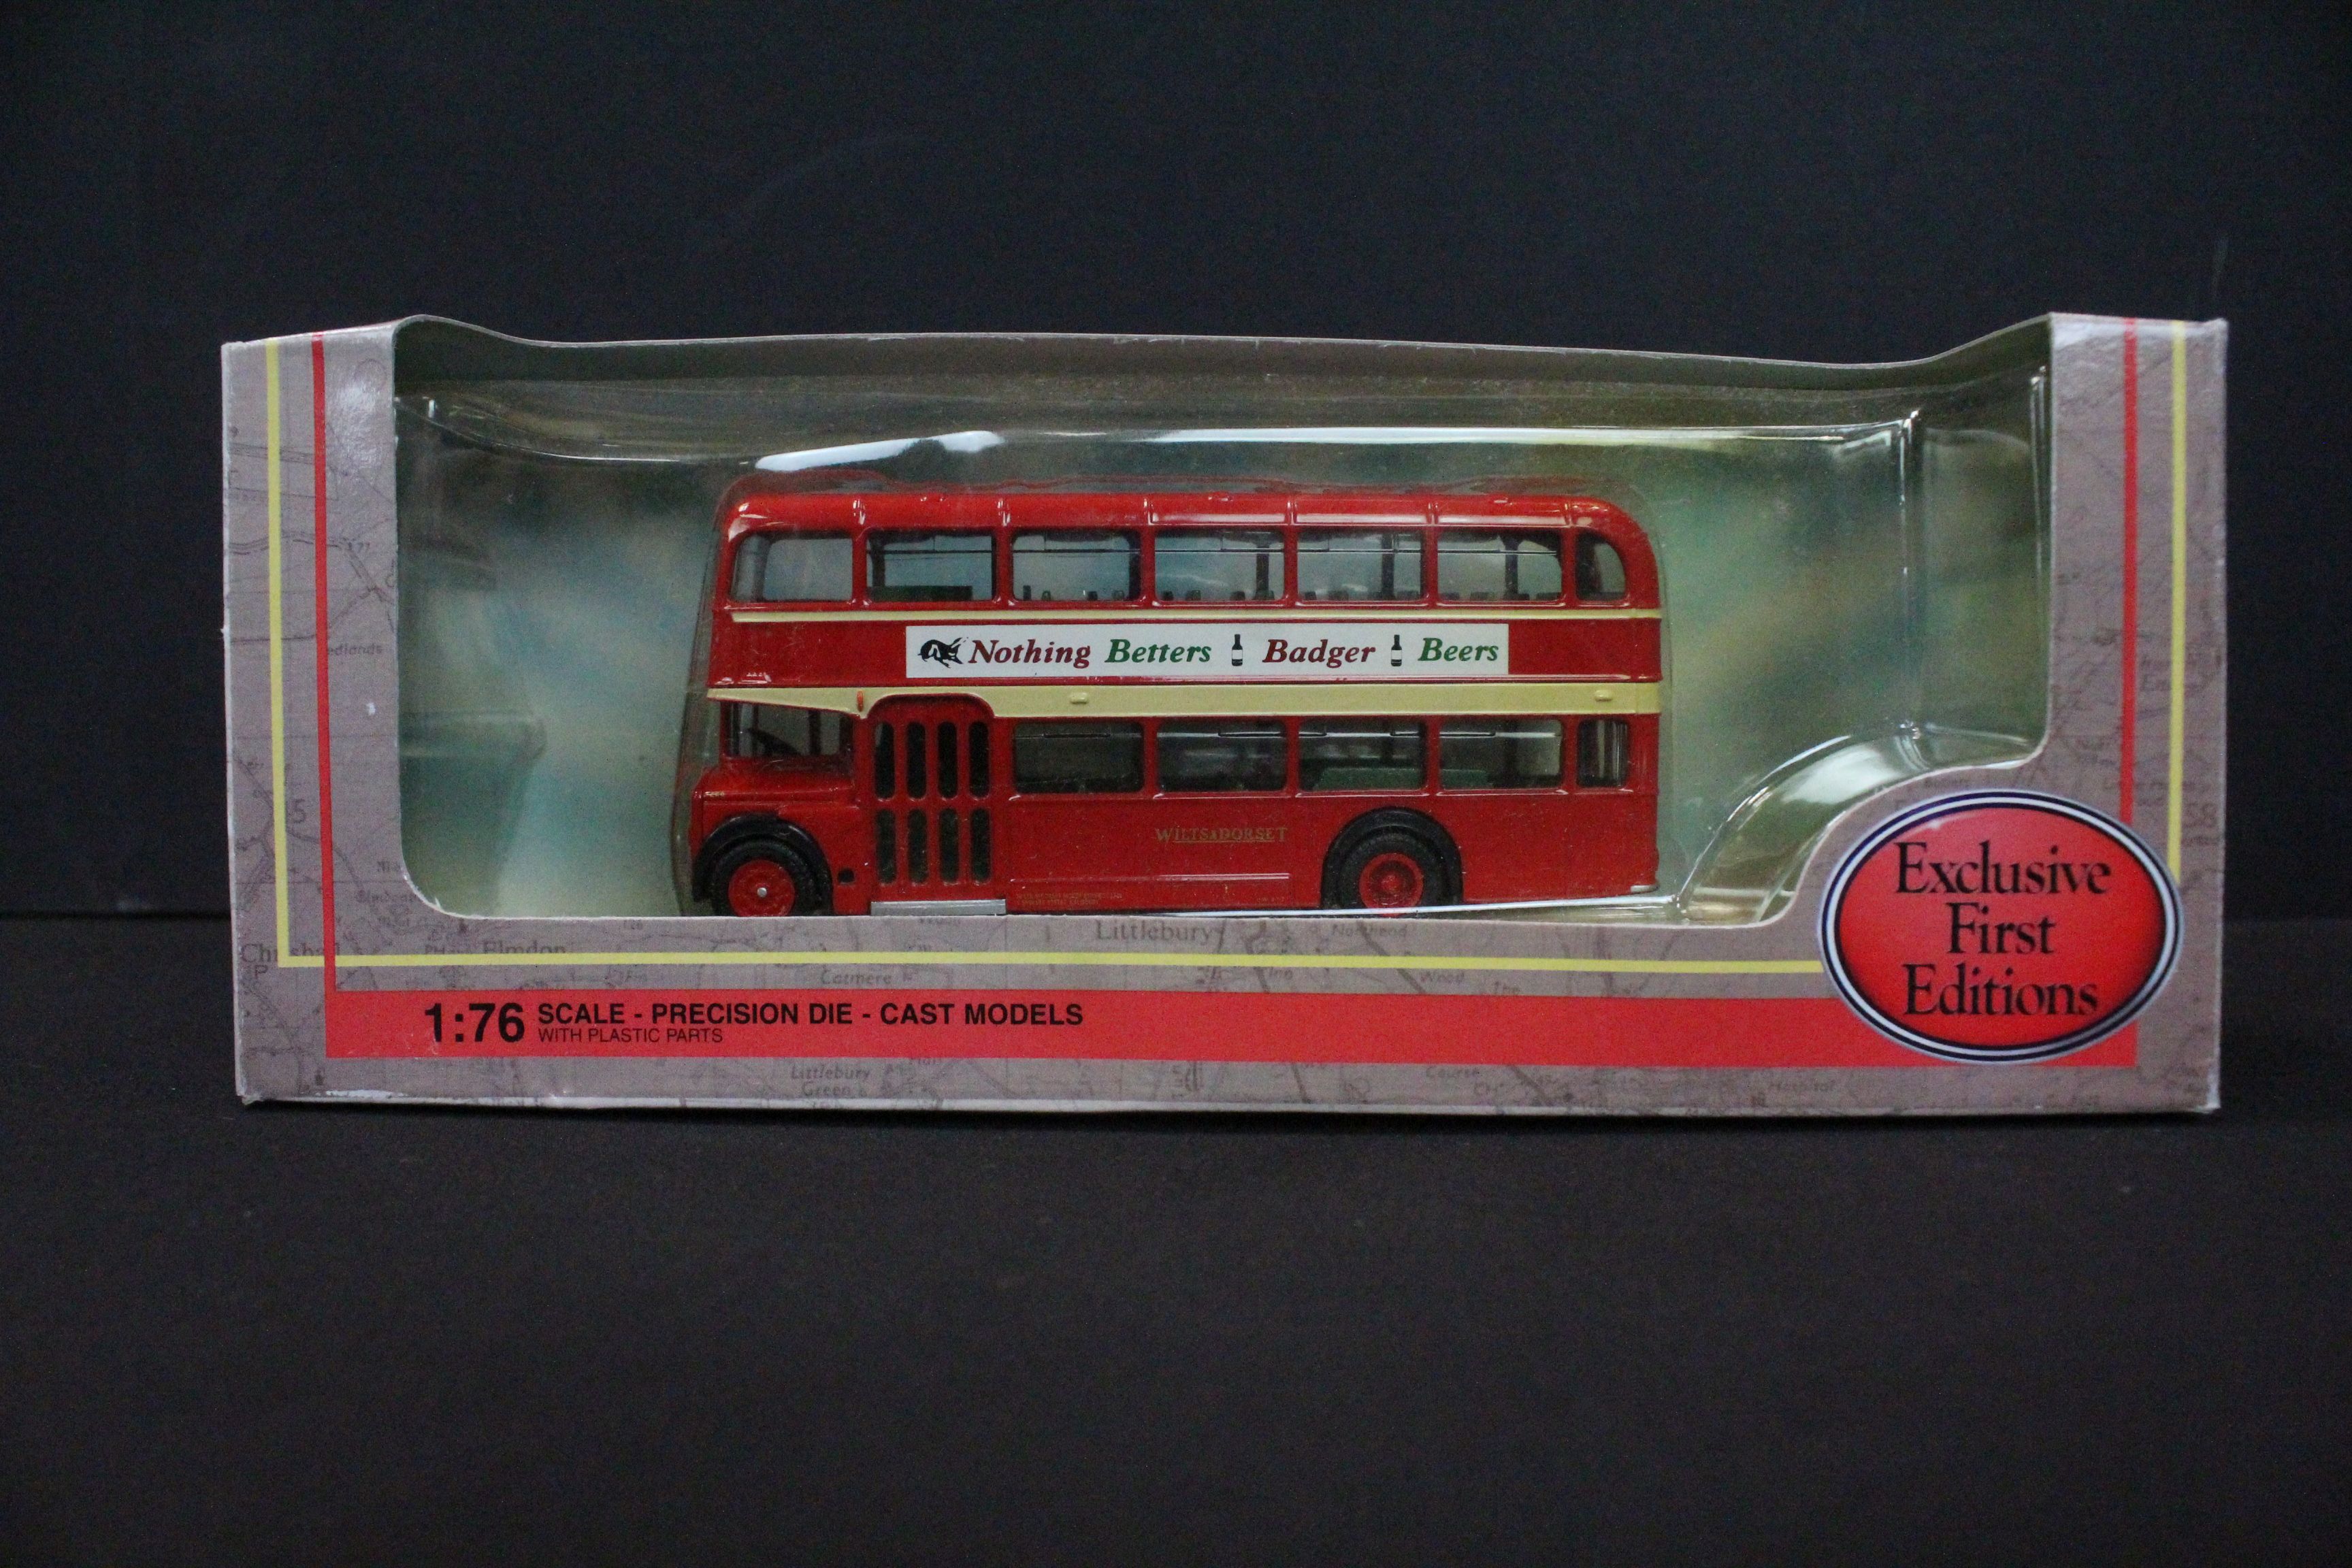 29 Boxed EFE Exclusive First Editions diecast model buses, diecast ex, boxes gd to vg overall - Image 6 of 8